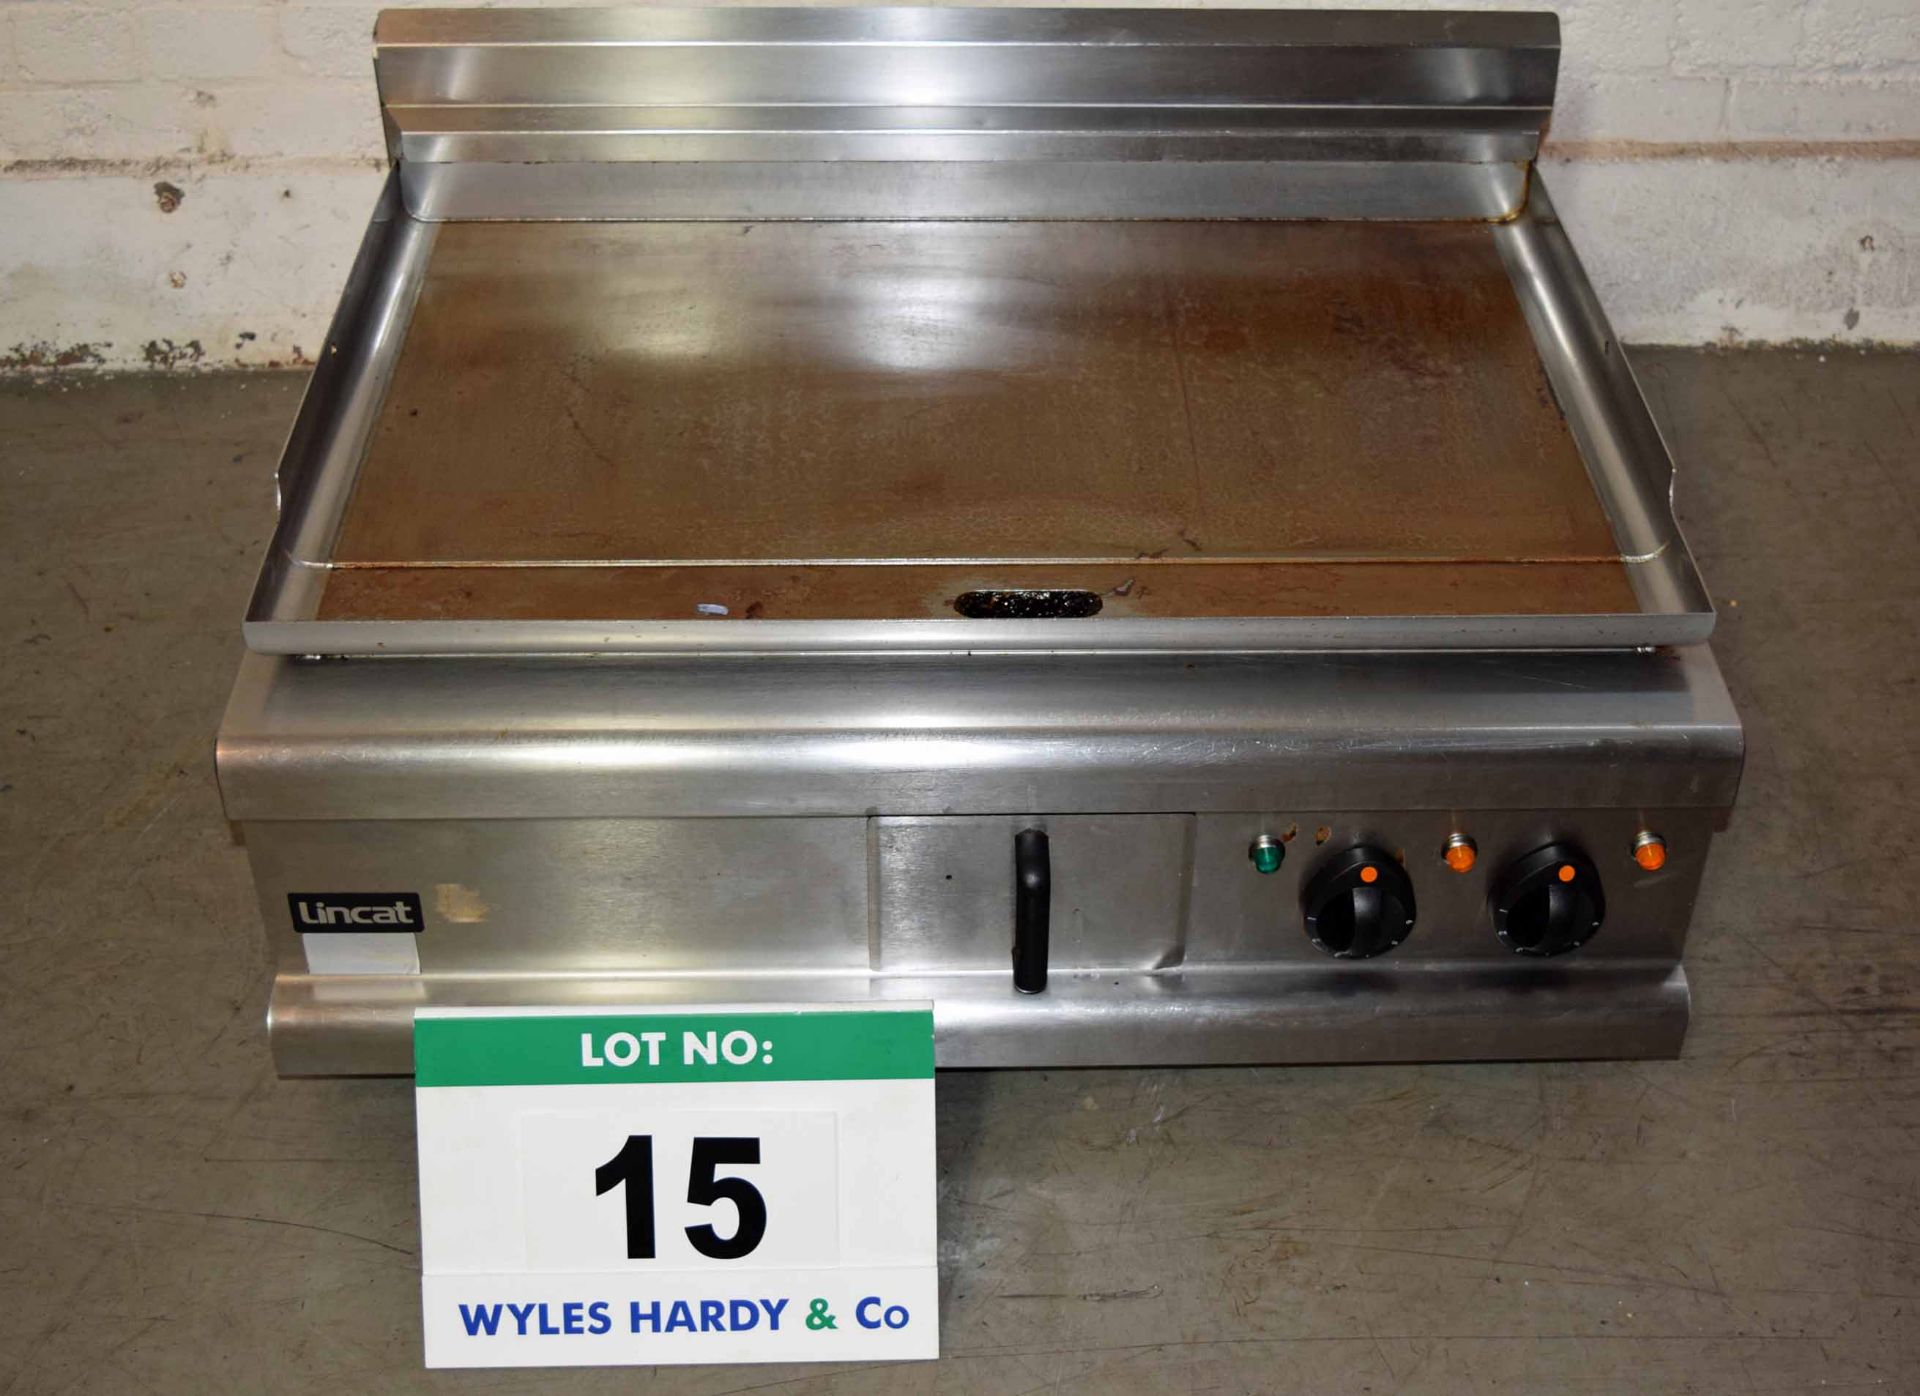 A LINCAT IP21B 3-Phase Twin Element Griddle Plate